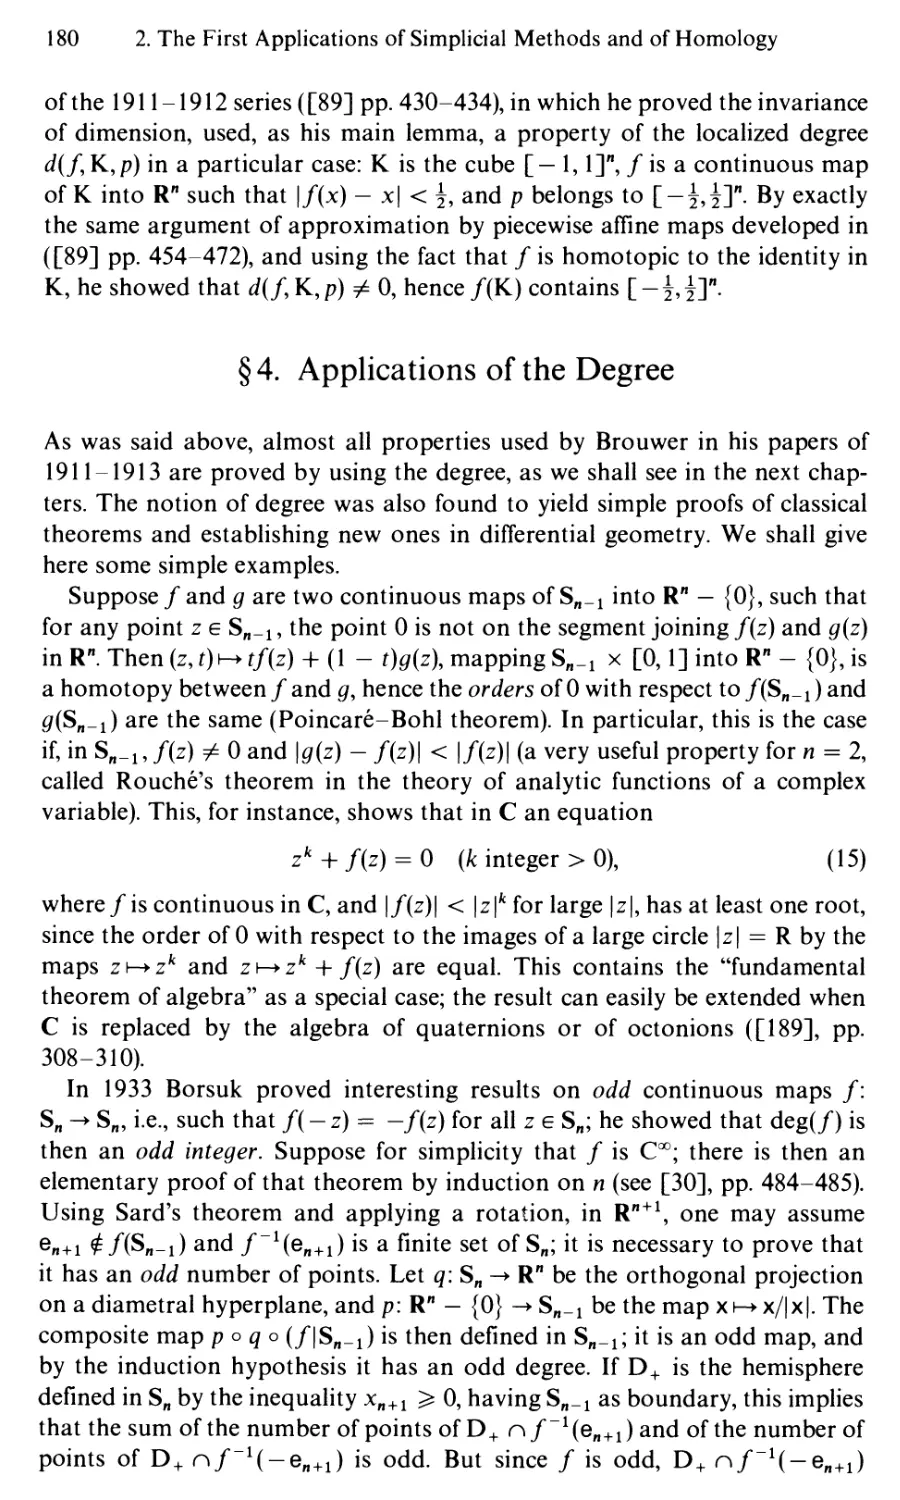 §4. Applications of the Degree